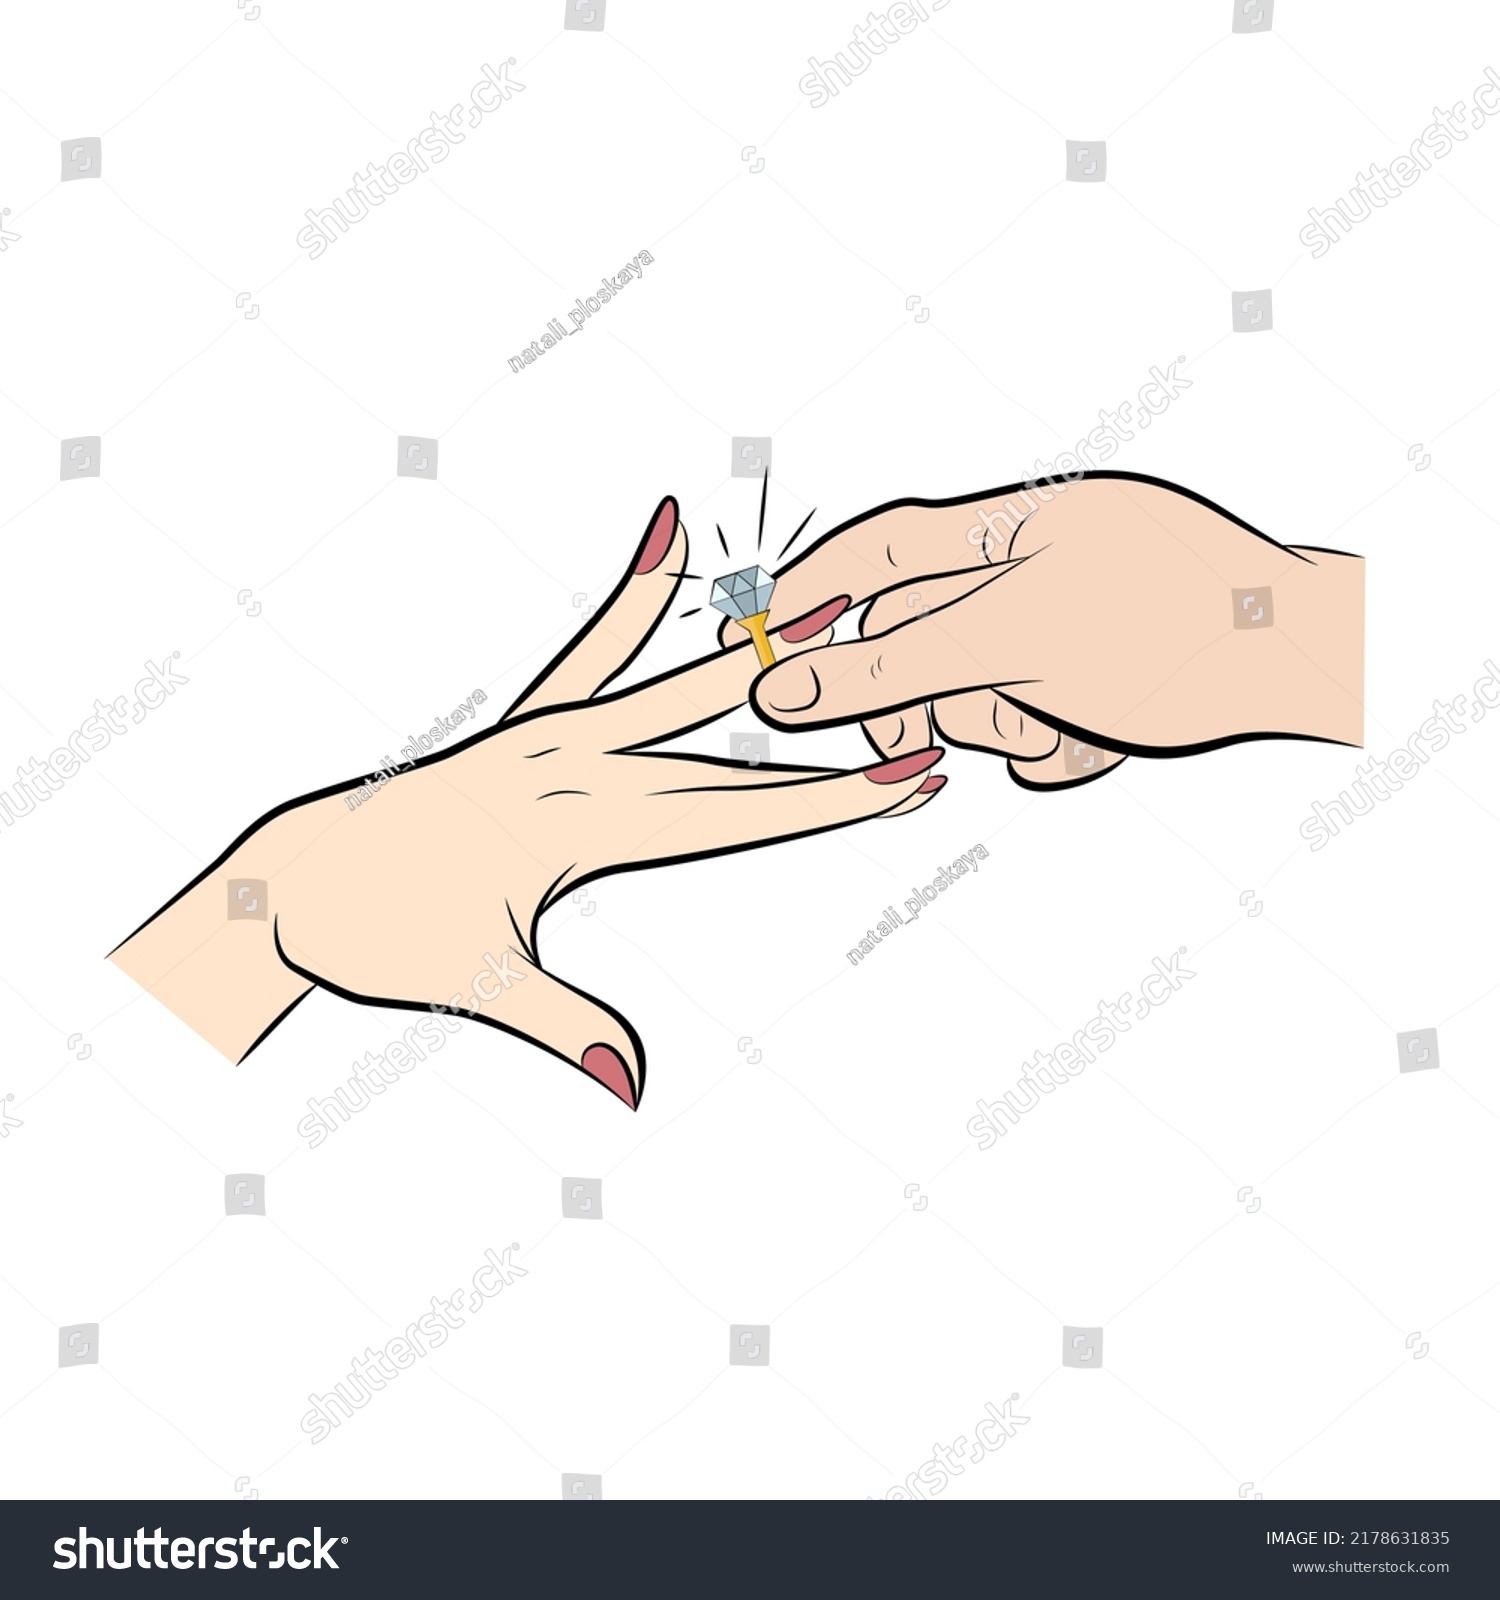 SVG of Man's hand putting a diamond ring on a woman's finger.  svg